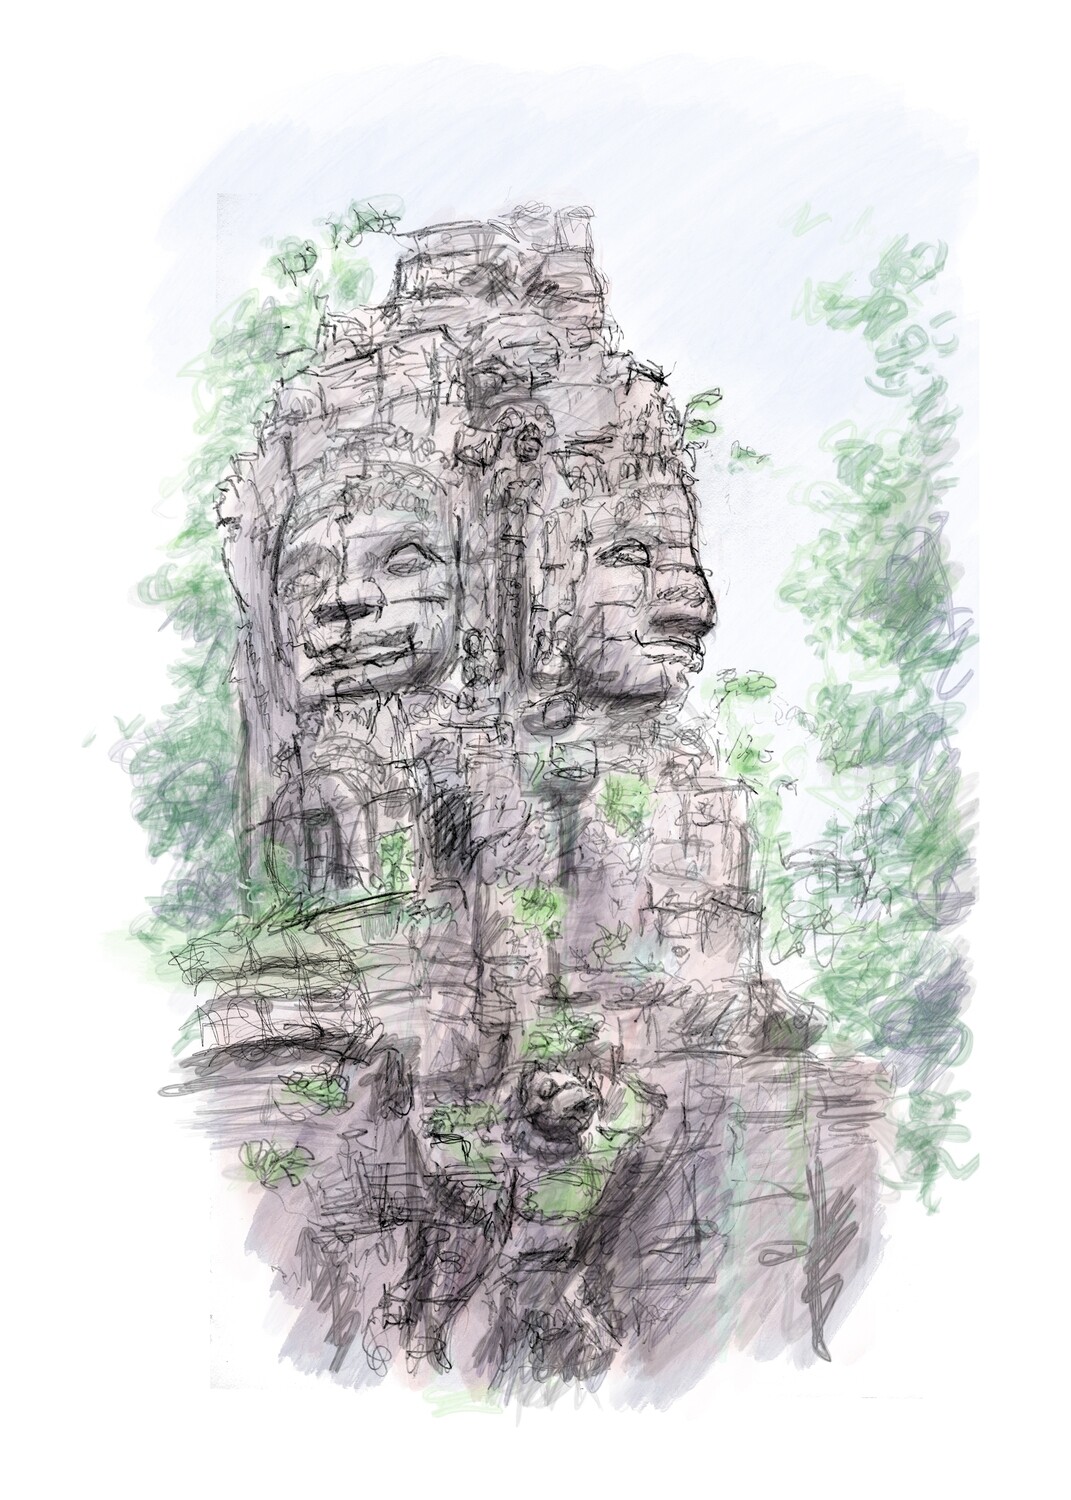 Taprohm's South Gate